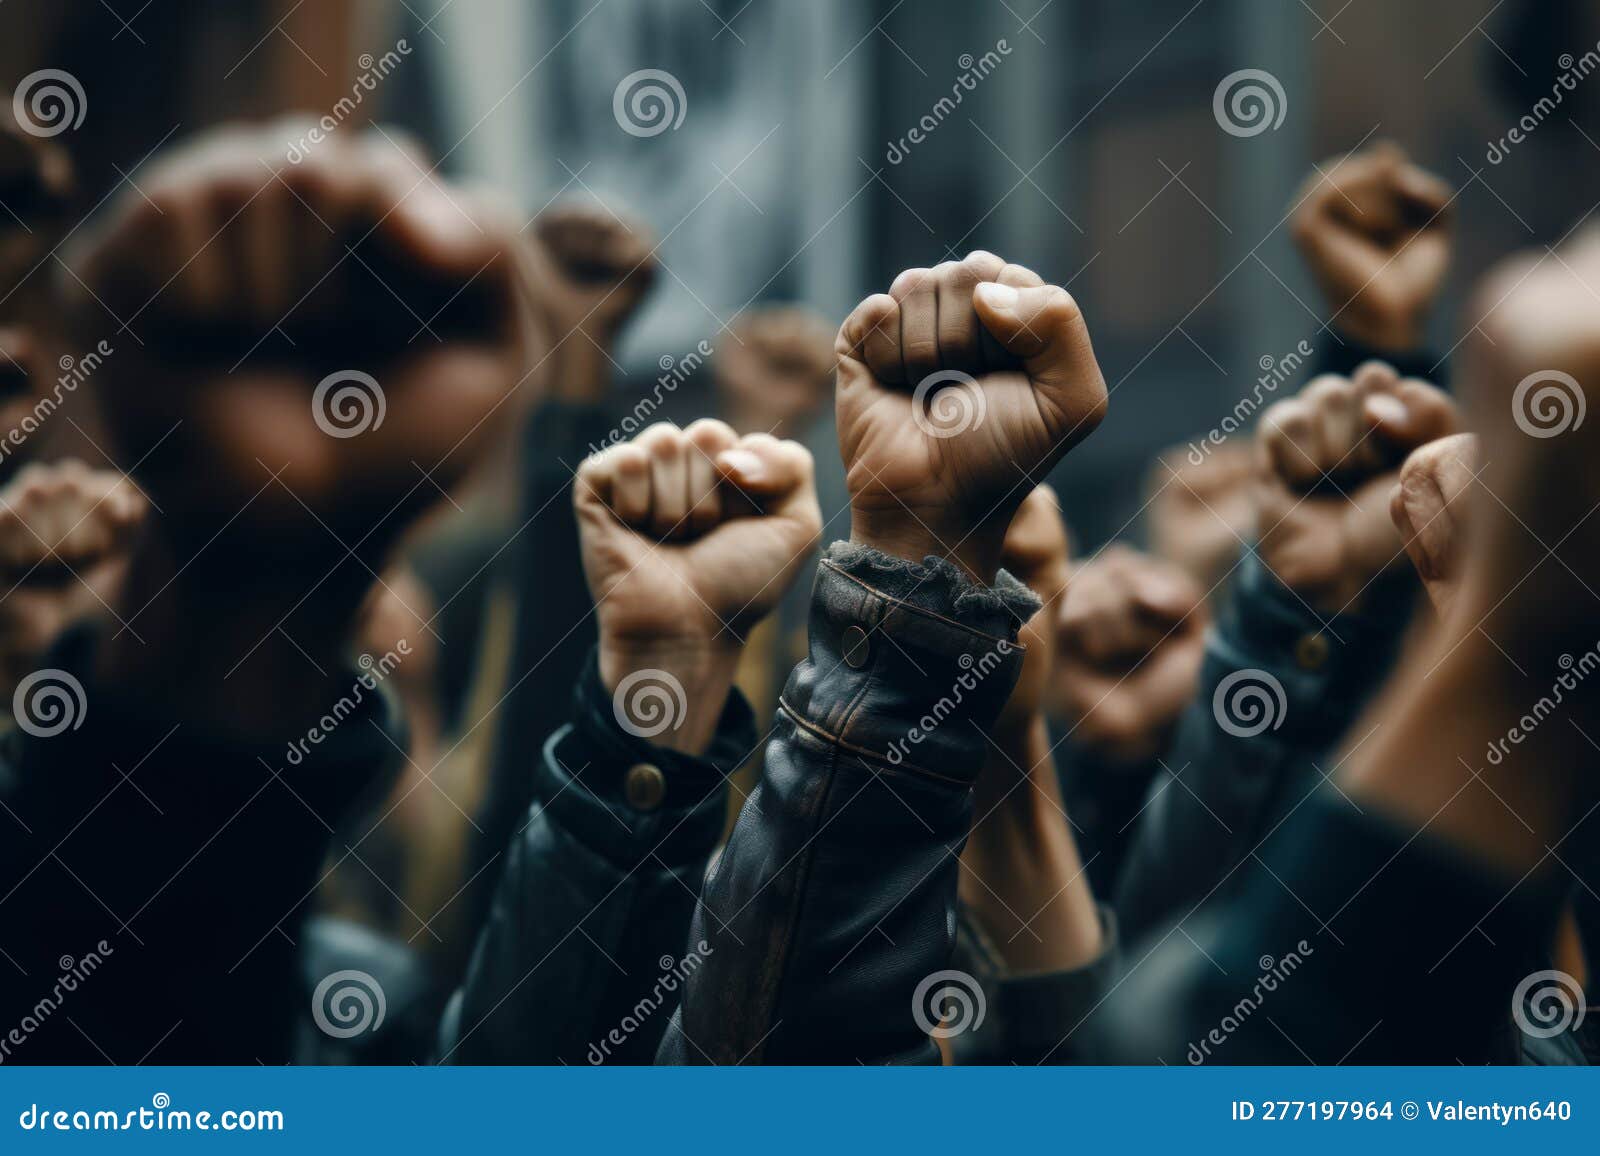 Group of People Raising Their Fists in the Air with Their Hands in the ...